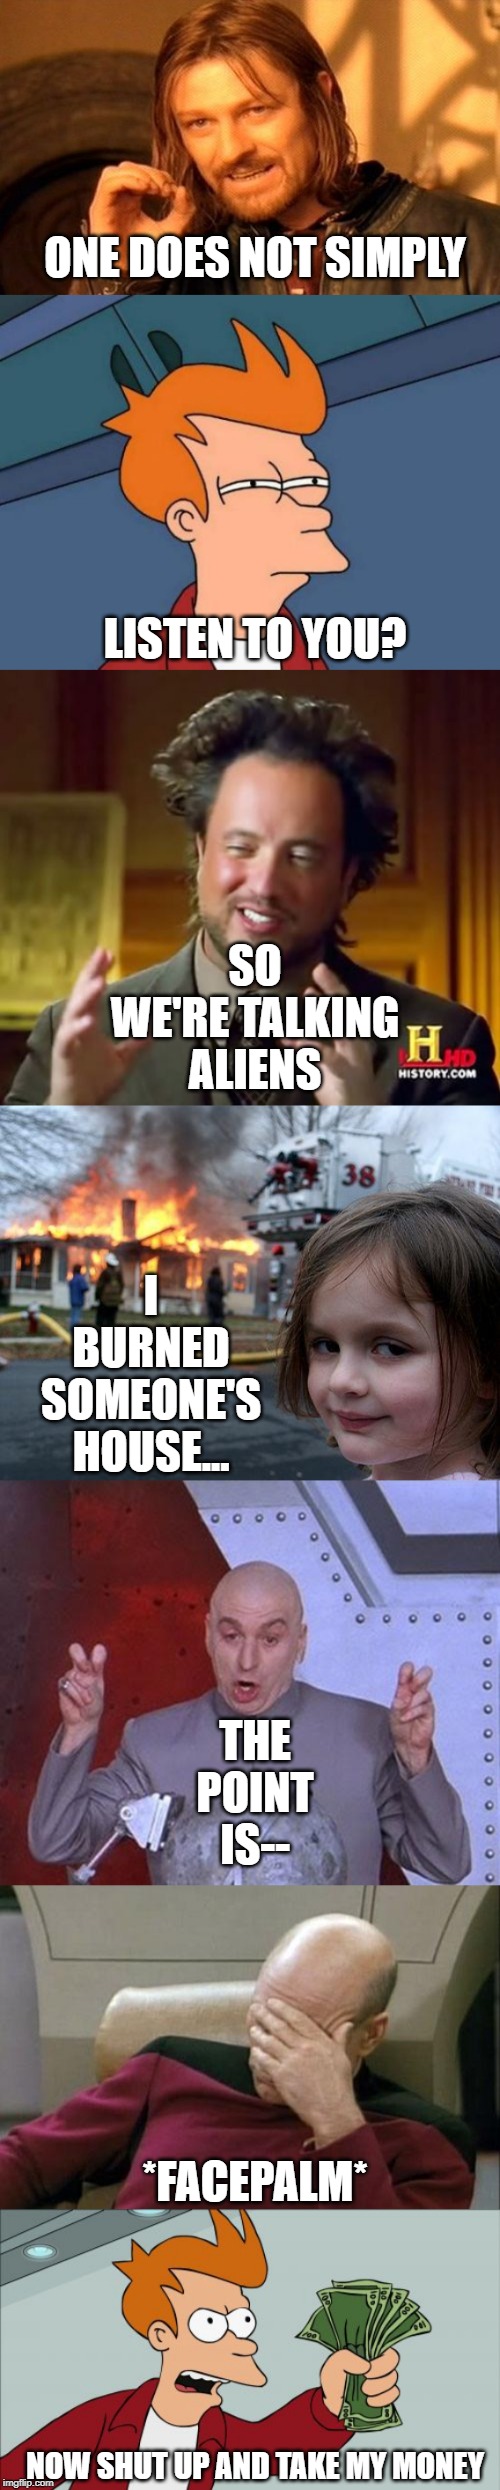 ONE DOES NOT SIMPLY; LISTEN TO YOU? SO WE'RE TALKING ALIENS; I BURNED SOMEONE'S HOUSE... THE POINT IS--; *FACEPALM*; NOW SHUT UP AND TAKE MY MONEY | image tagged in memes,futurama fry,one does not simply,disaster girl,ancient aliens,shut up and take my money fry | made w/ Imgflip meme maker